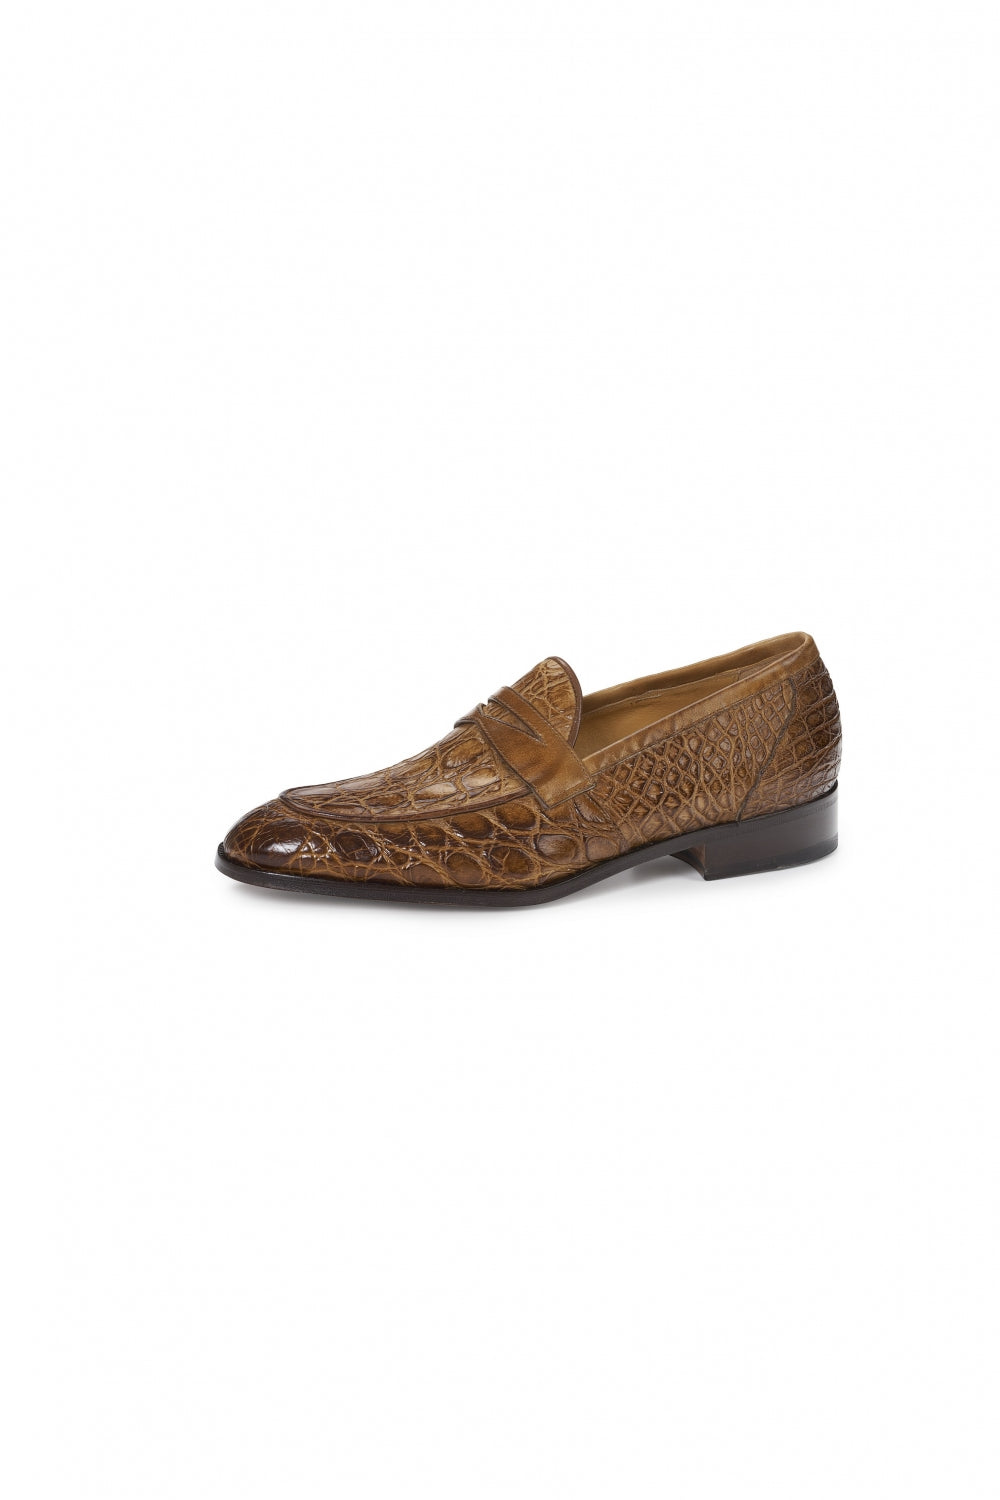 Mauri 4862 Brown Crocodile Belly Penny Loafers – Dudes Boutique